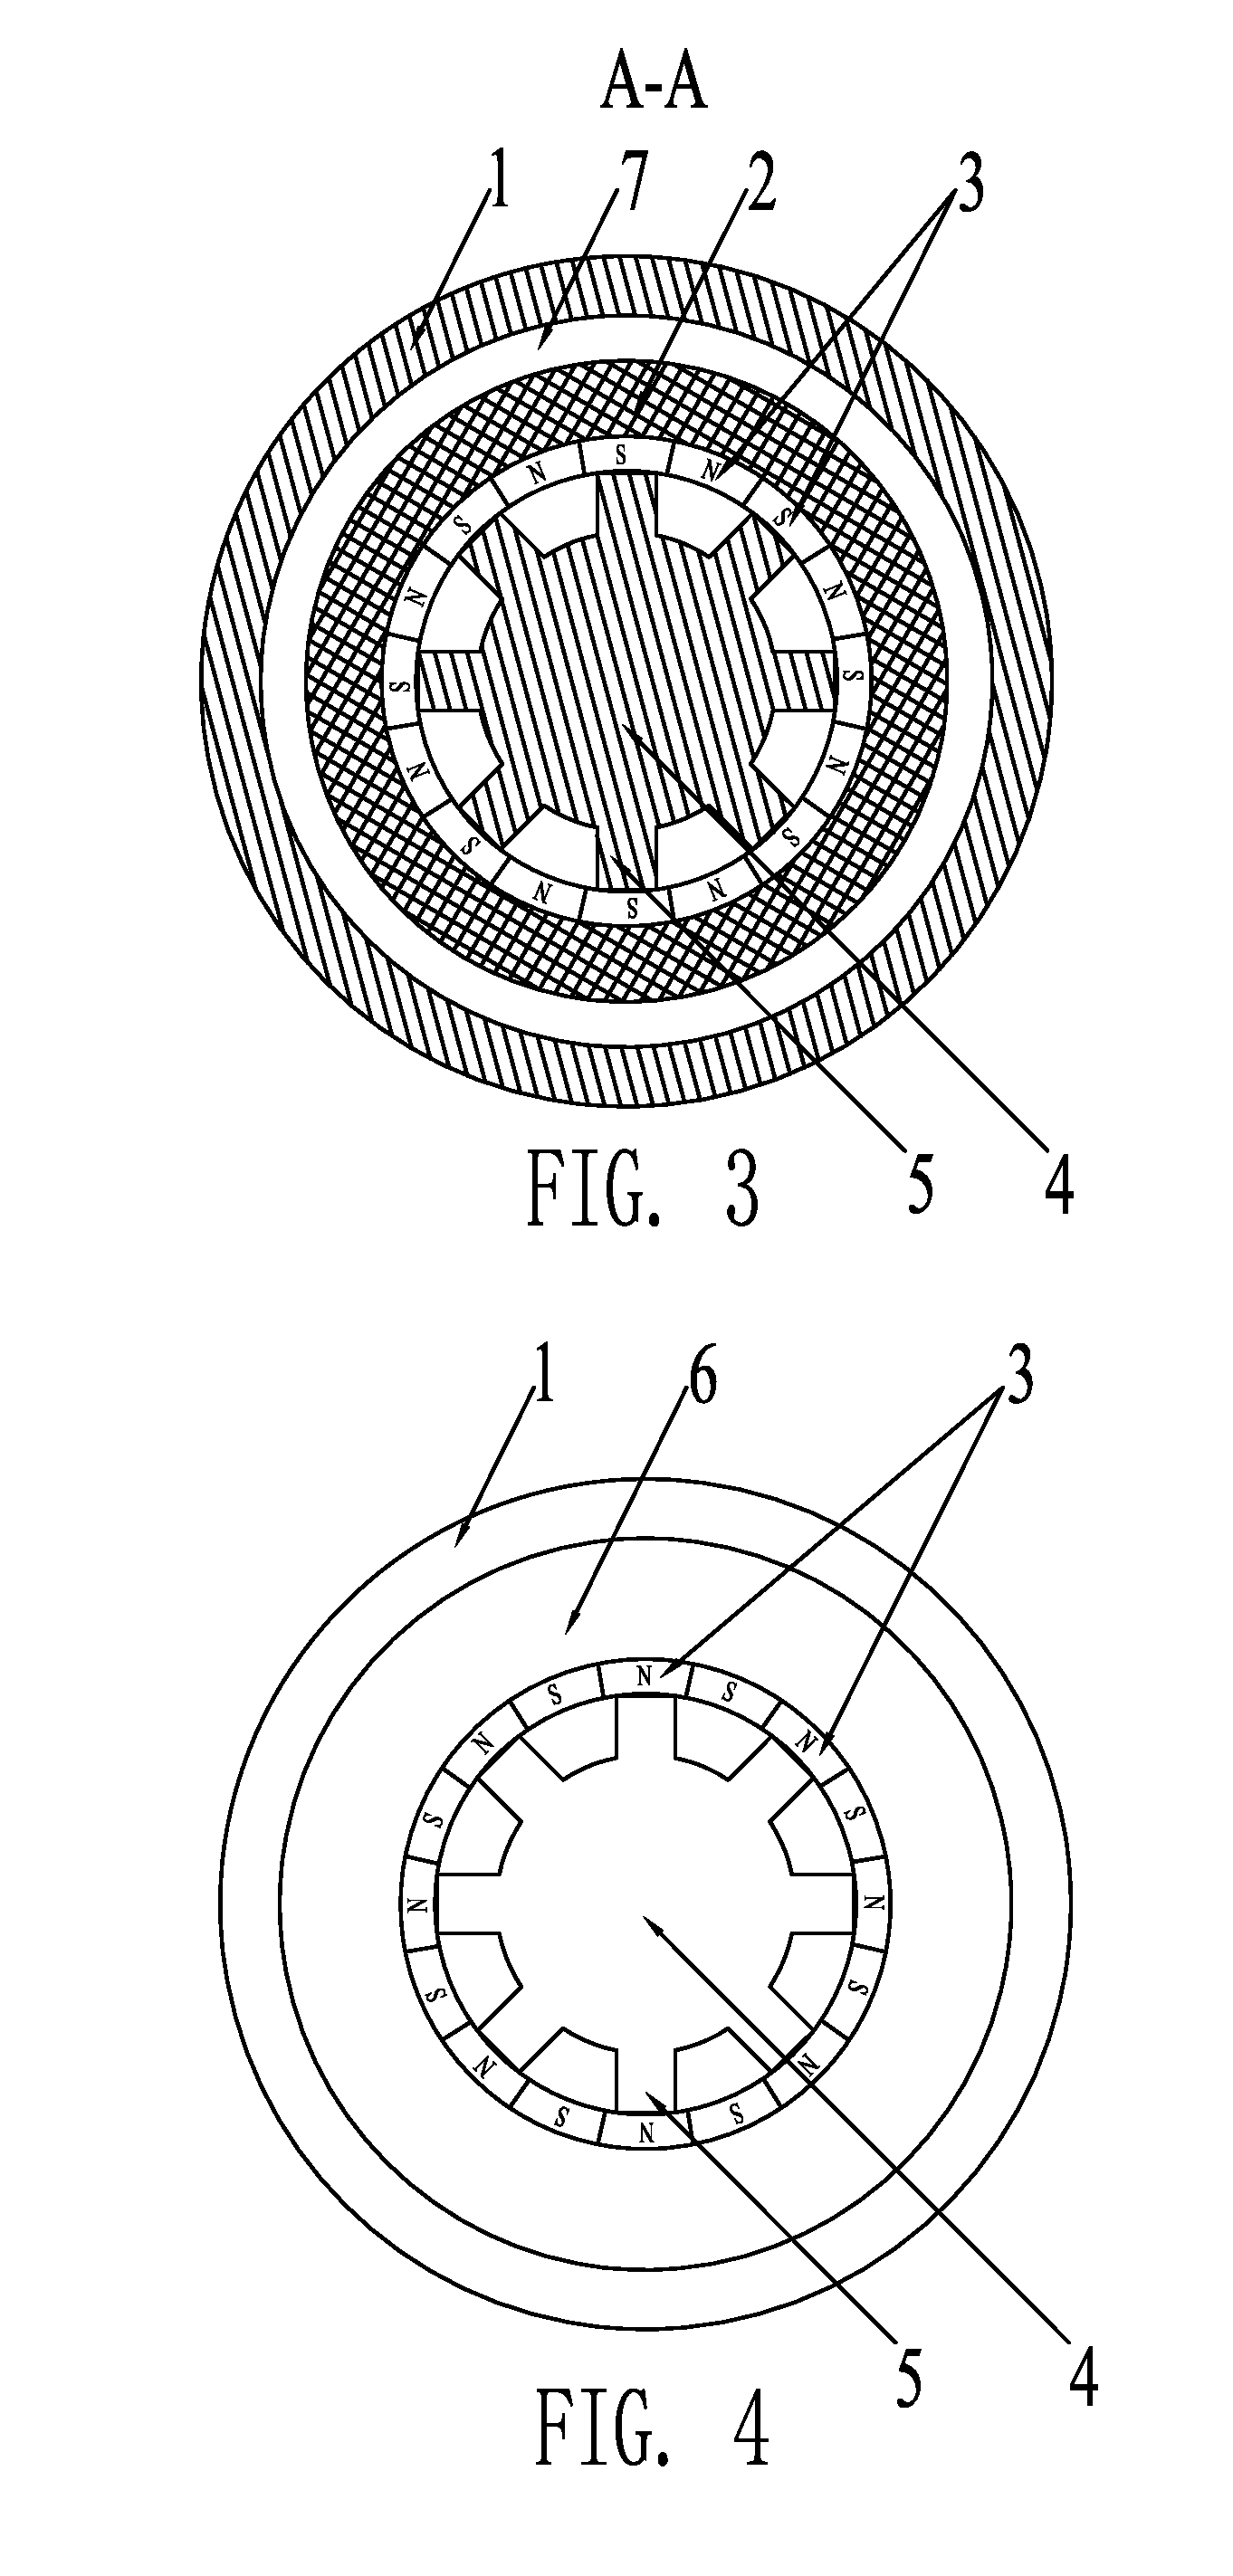 Poly-Phase Reluctance Electric Motor with Transverse Magnetic Flux